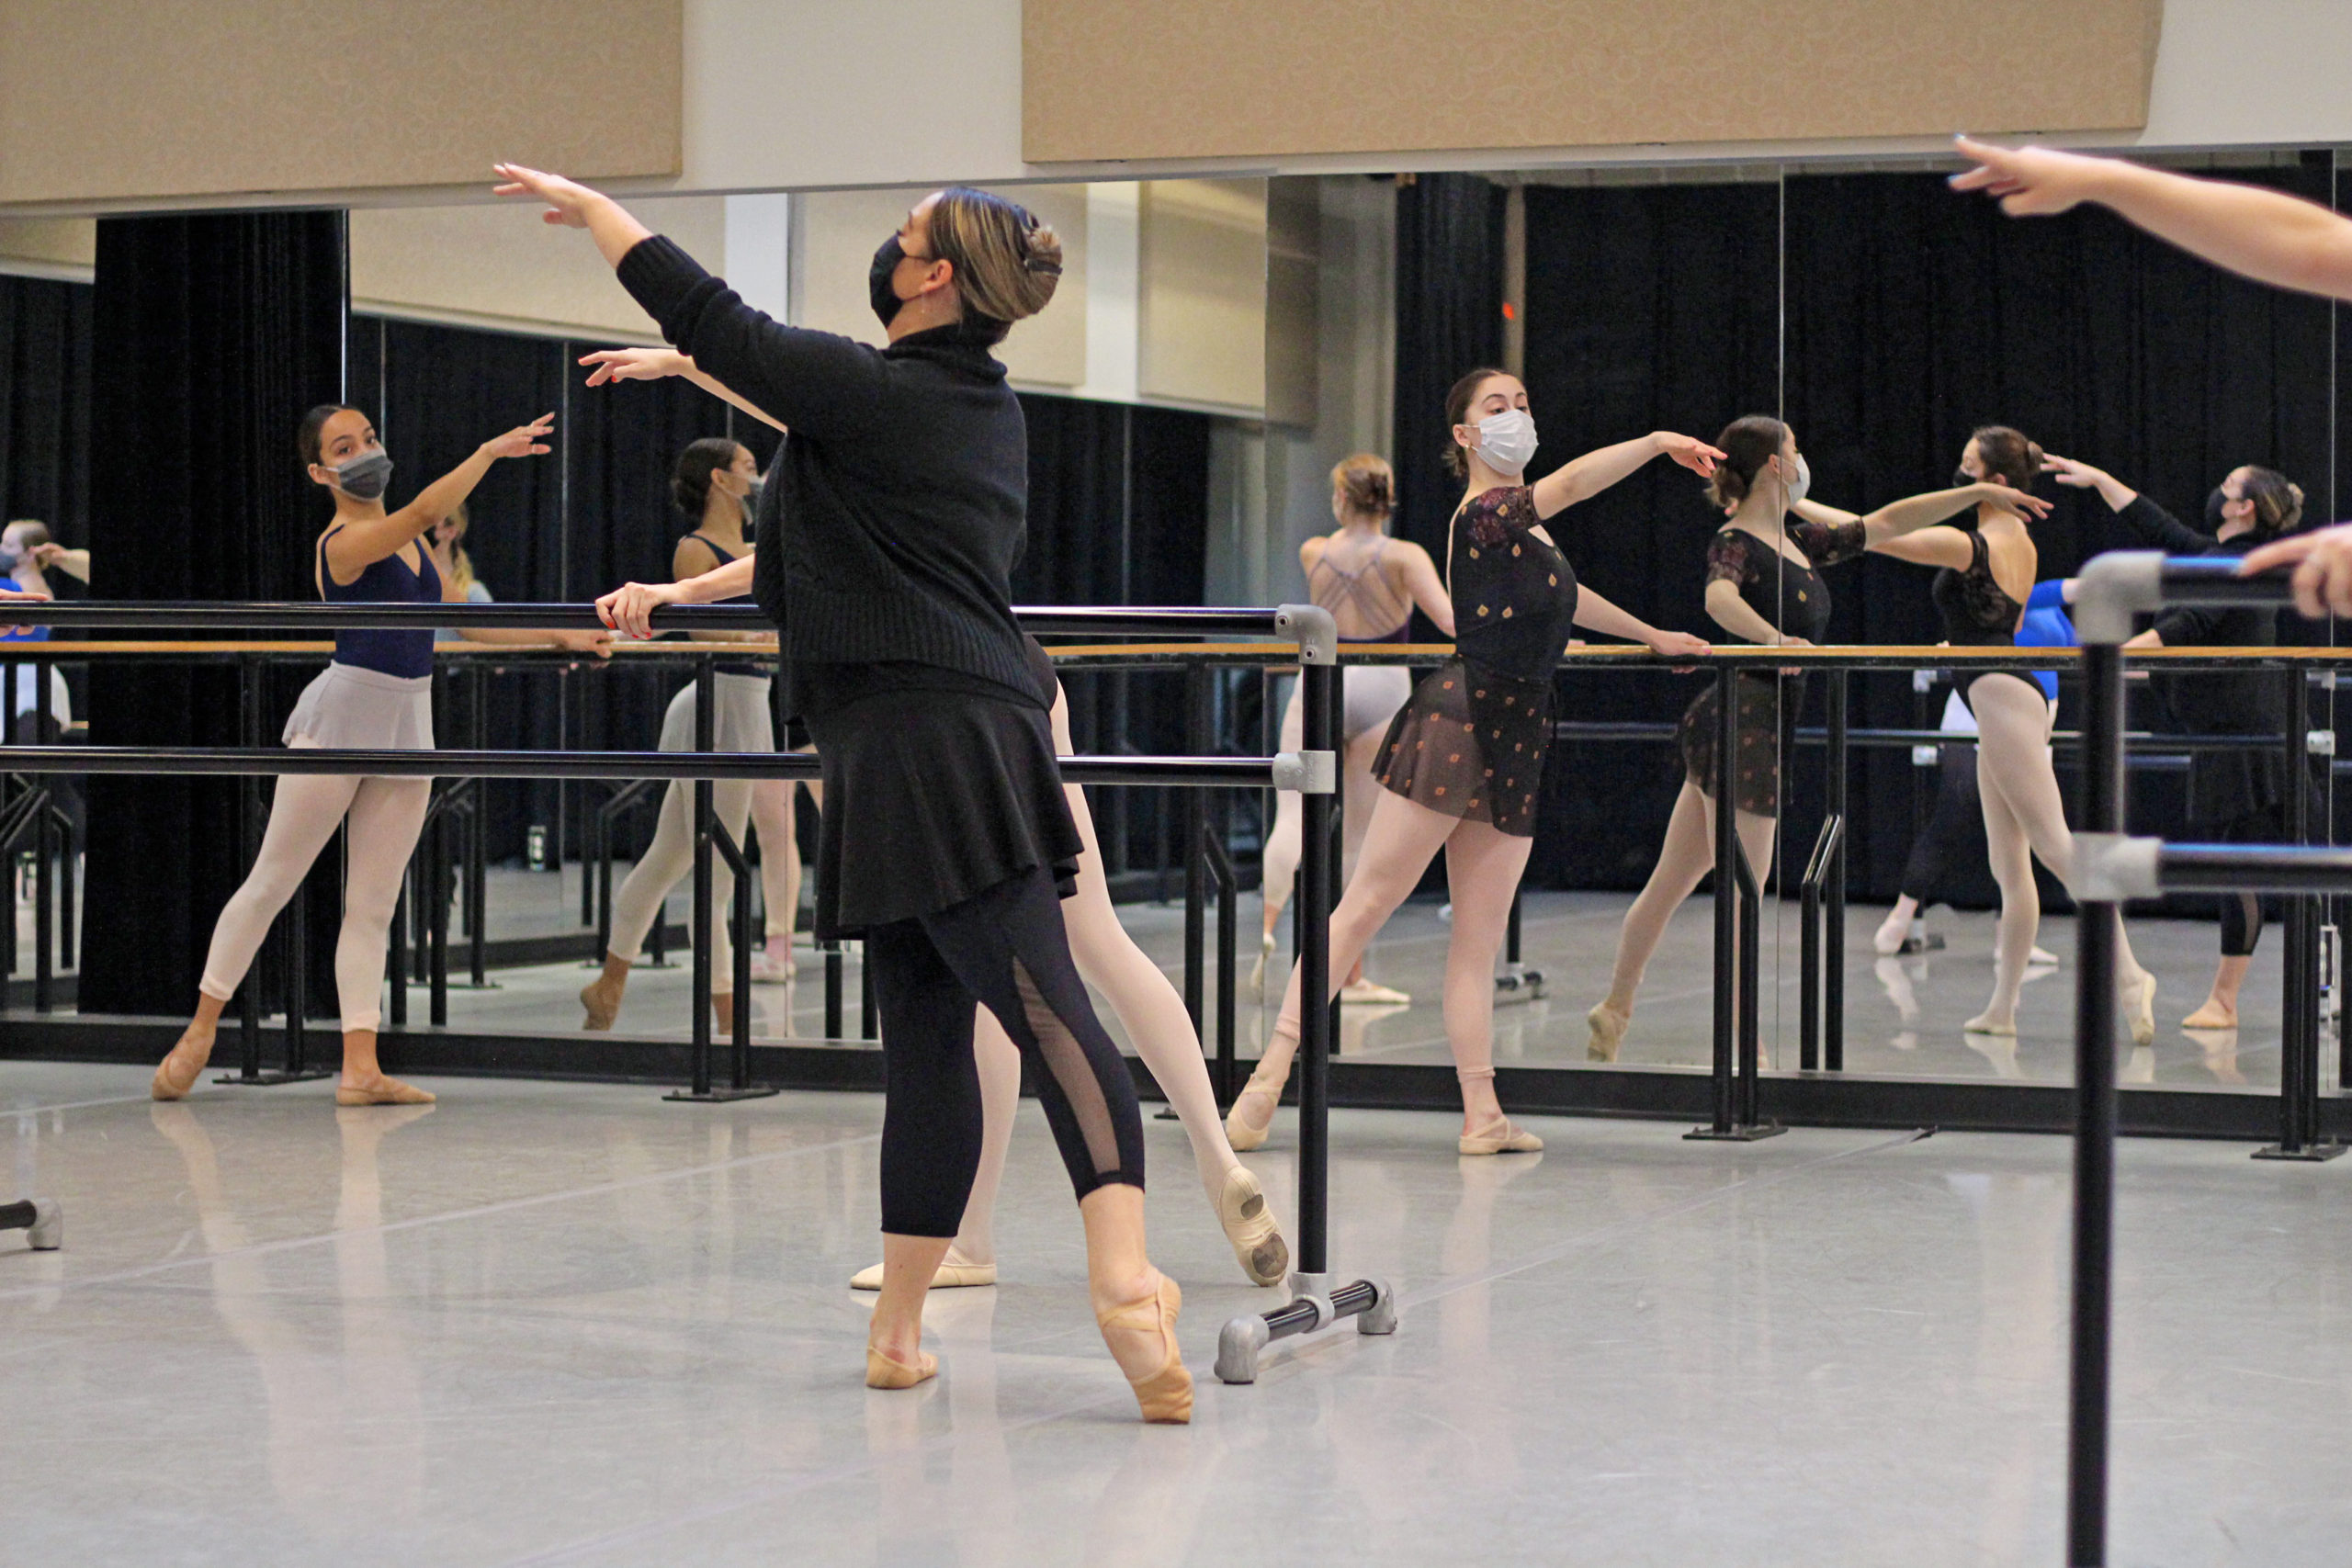 Jennifer Guy Metcalf demonstrates a tendu derriere with her left leg at the barre while her class of dance students follow suit. She wears a face mask, black sweater, black ballet skirt and leggings, and tan ballet slippers. Her students wear also wear face masks, leotards, tights and skirts and ballet slippers in various colors.